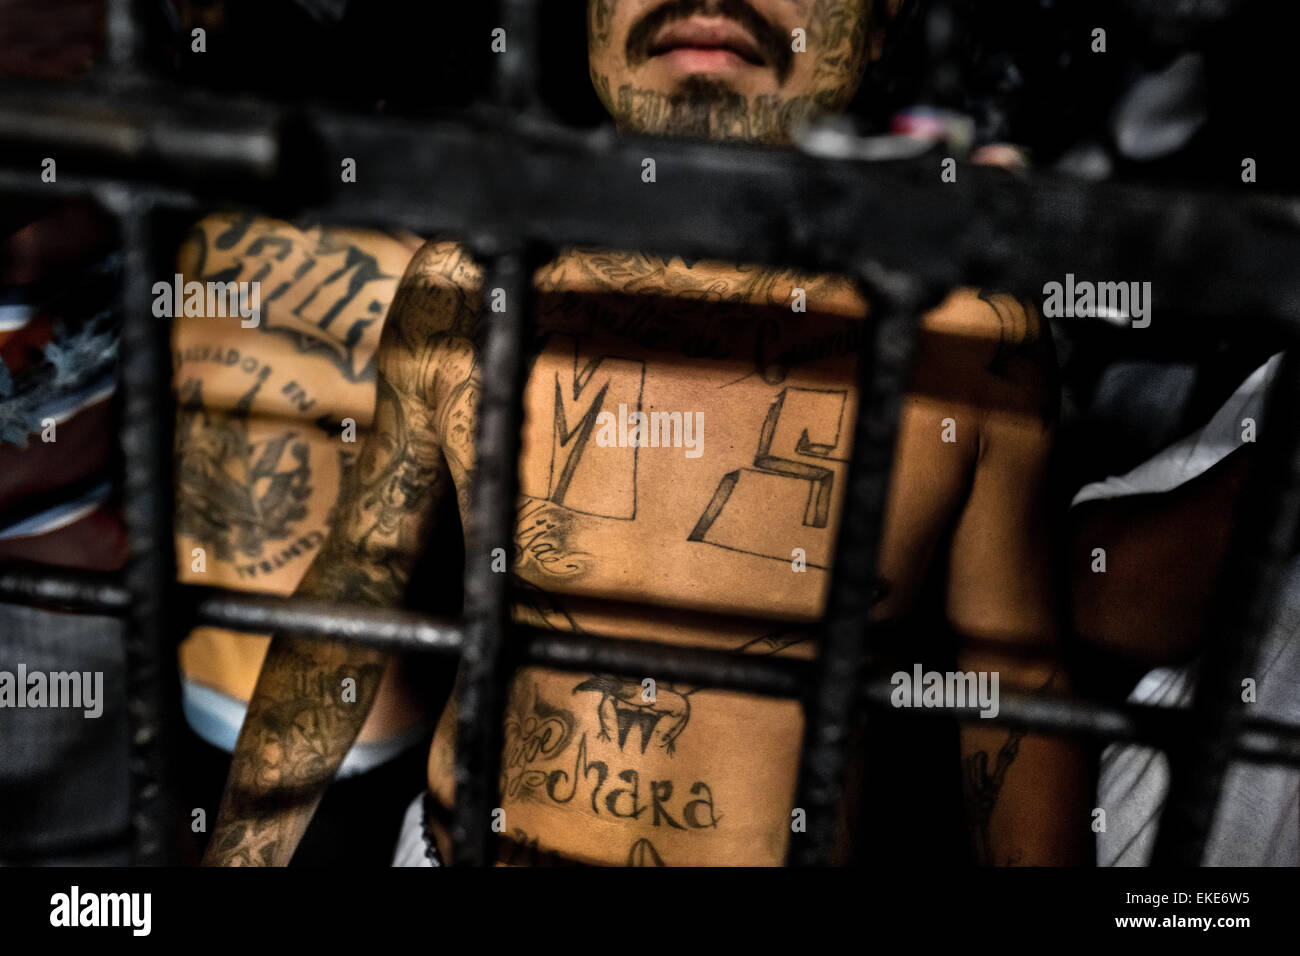 A Member Of The Mara Salvatrucha Gang Ms 13 Stands Behind The Bars In A Cell At The Detention 